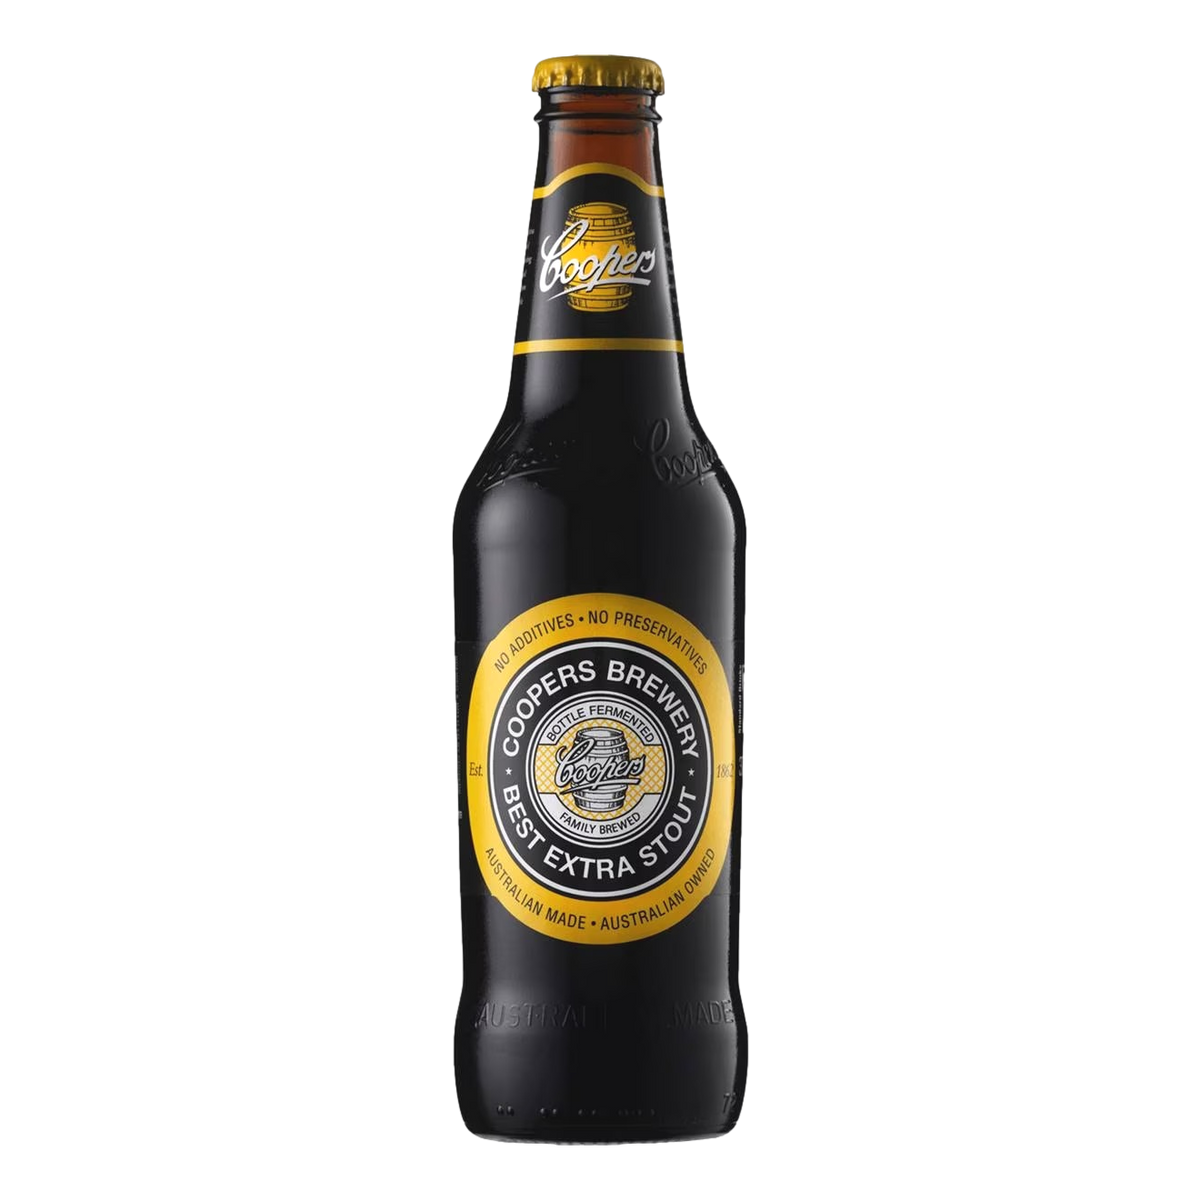 Coopers Extra Stout 375ml Bottle 6 Pack